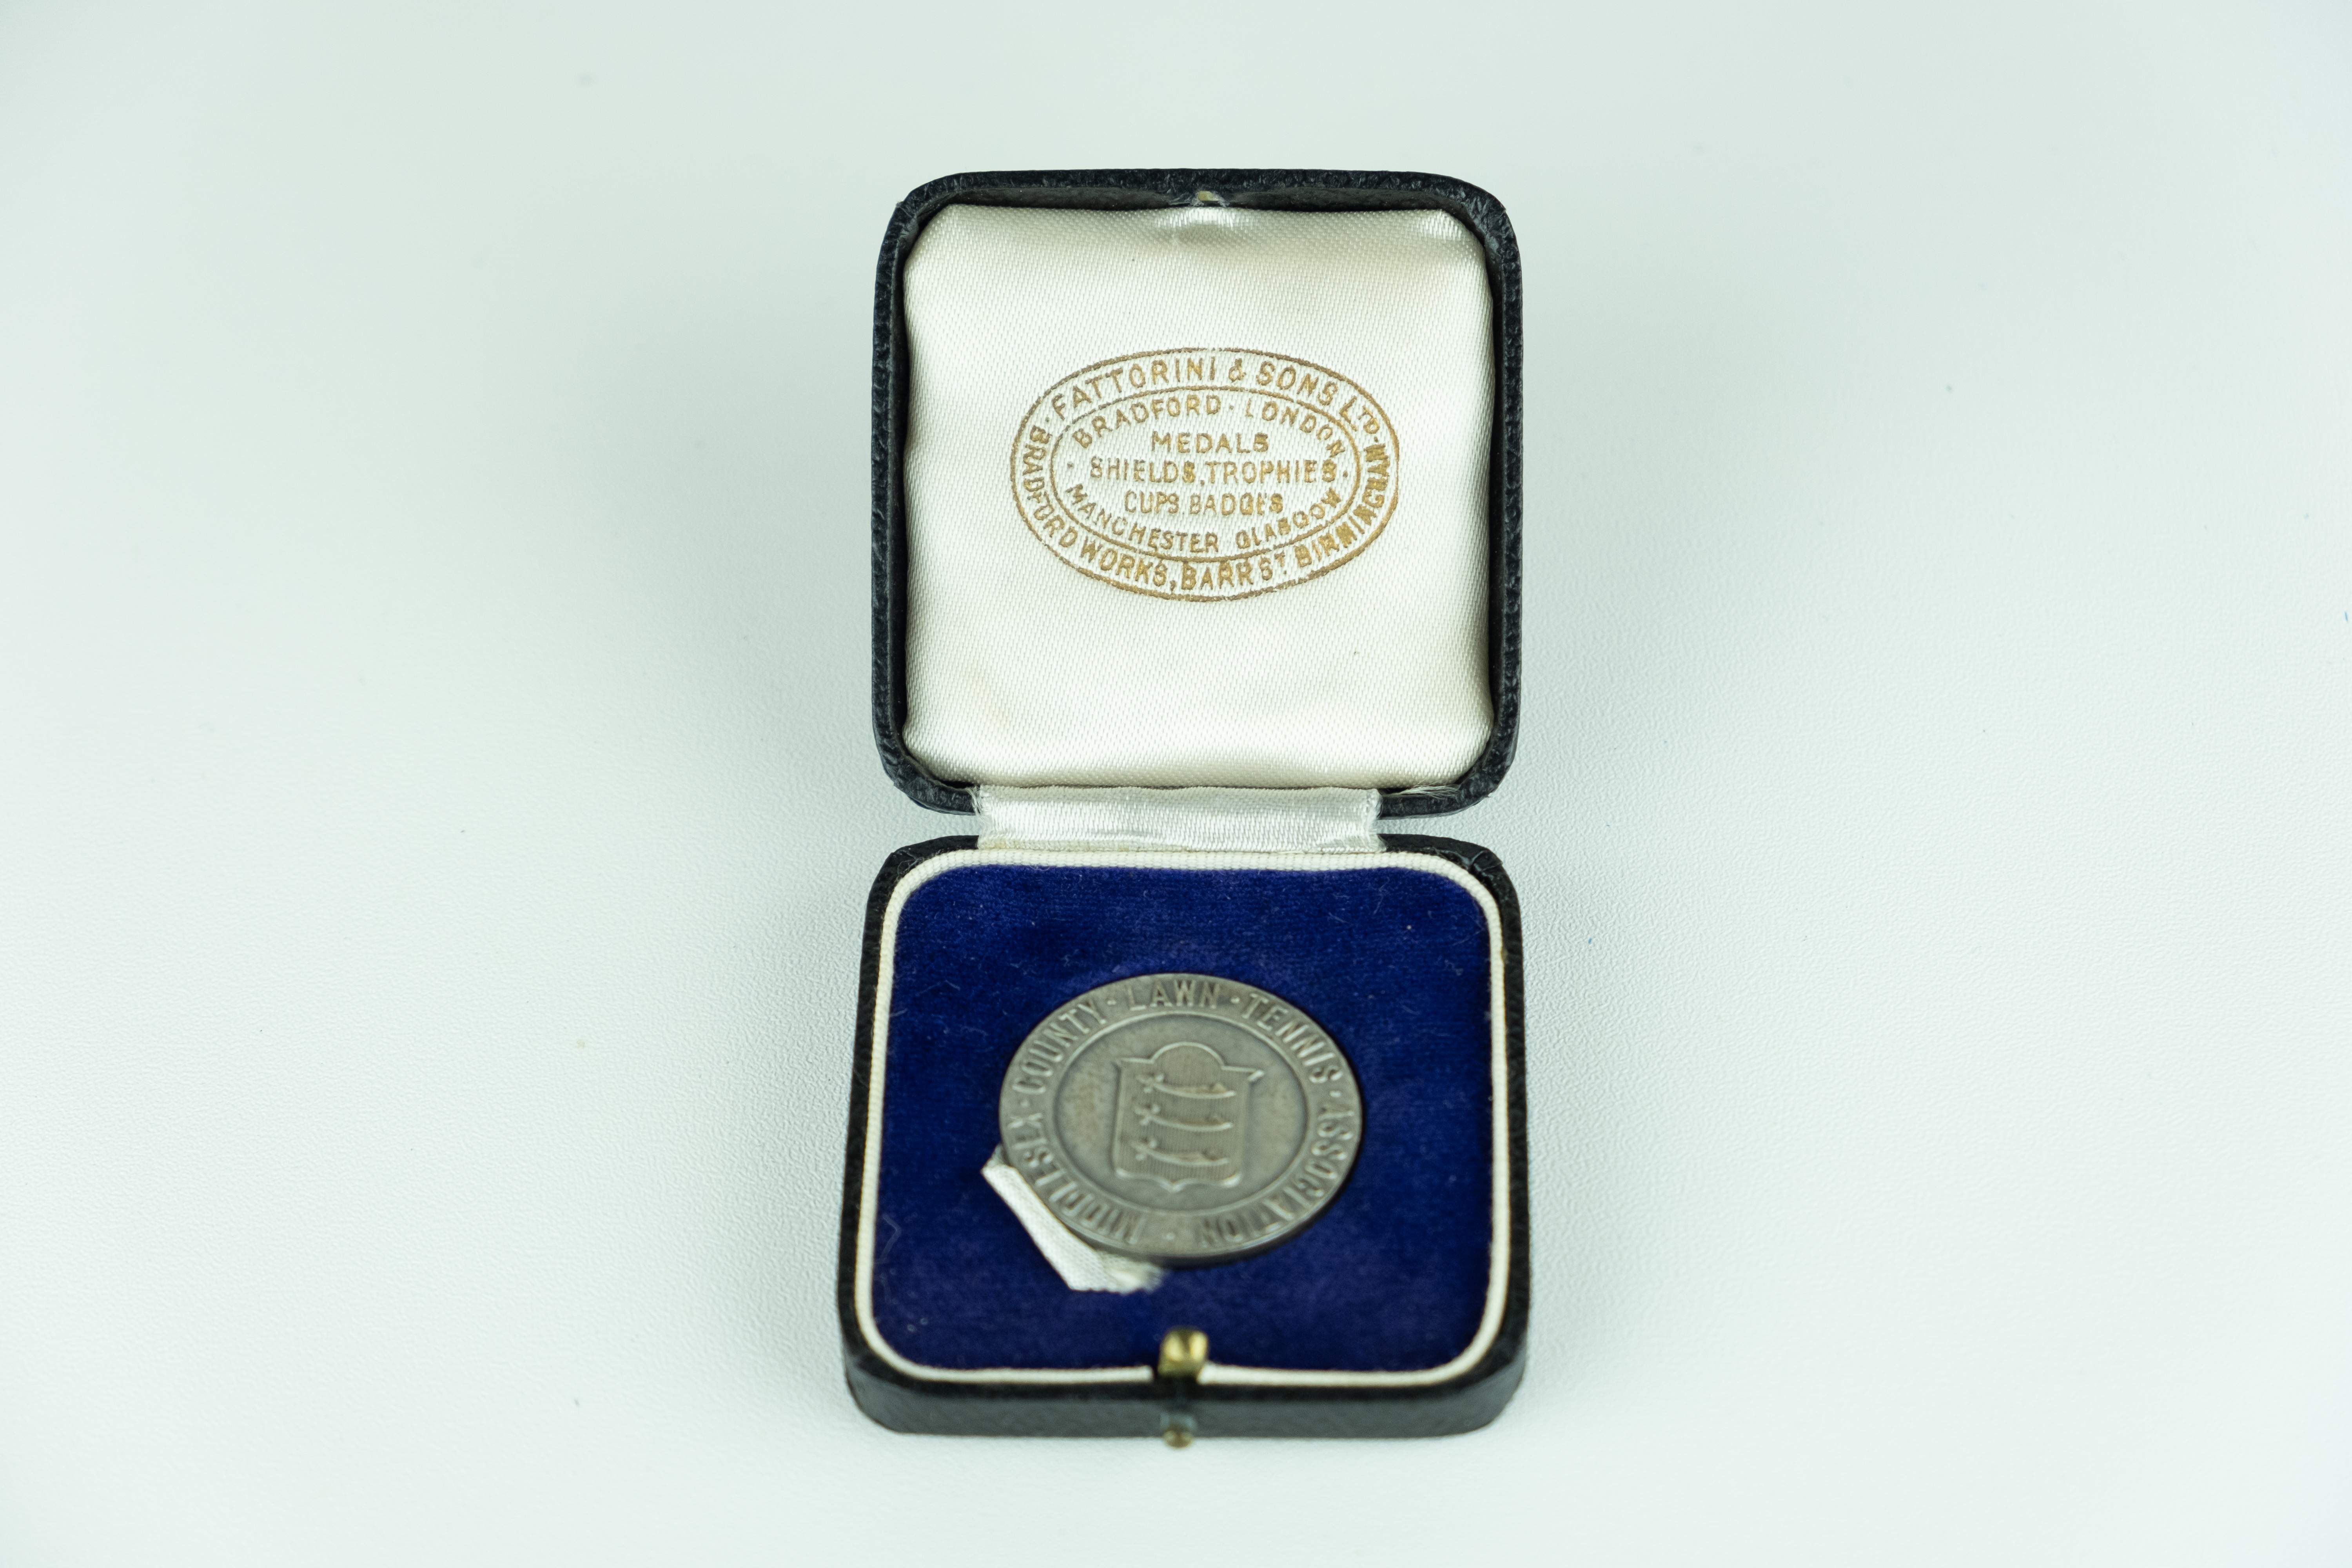 Middlesex County Lawn Tennis Association Medal, 1932